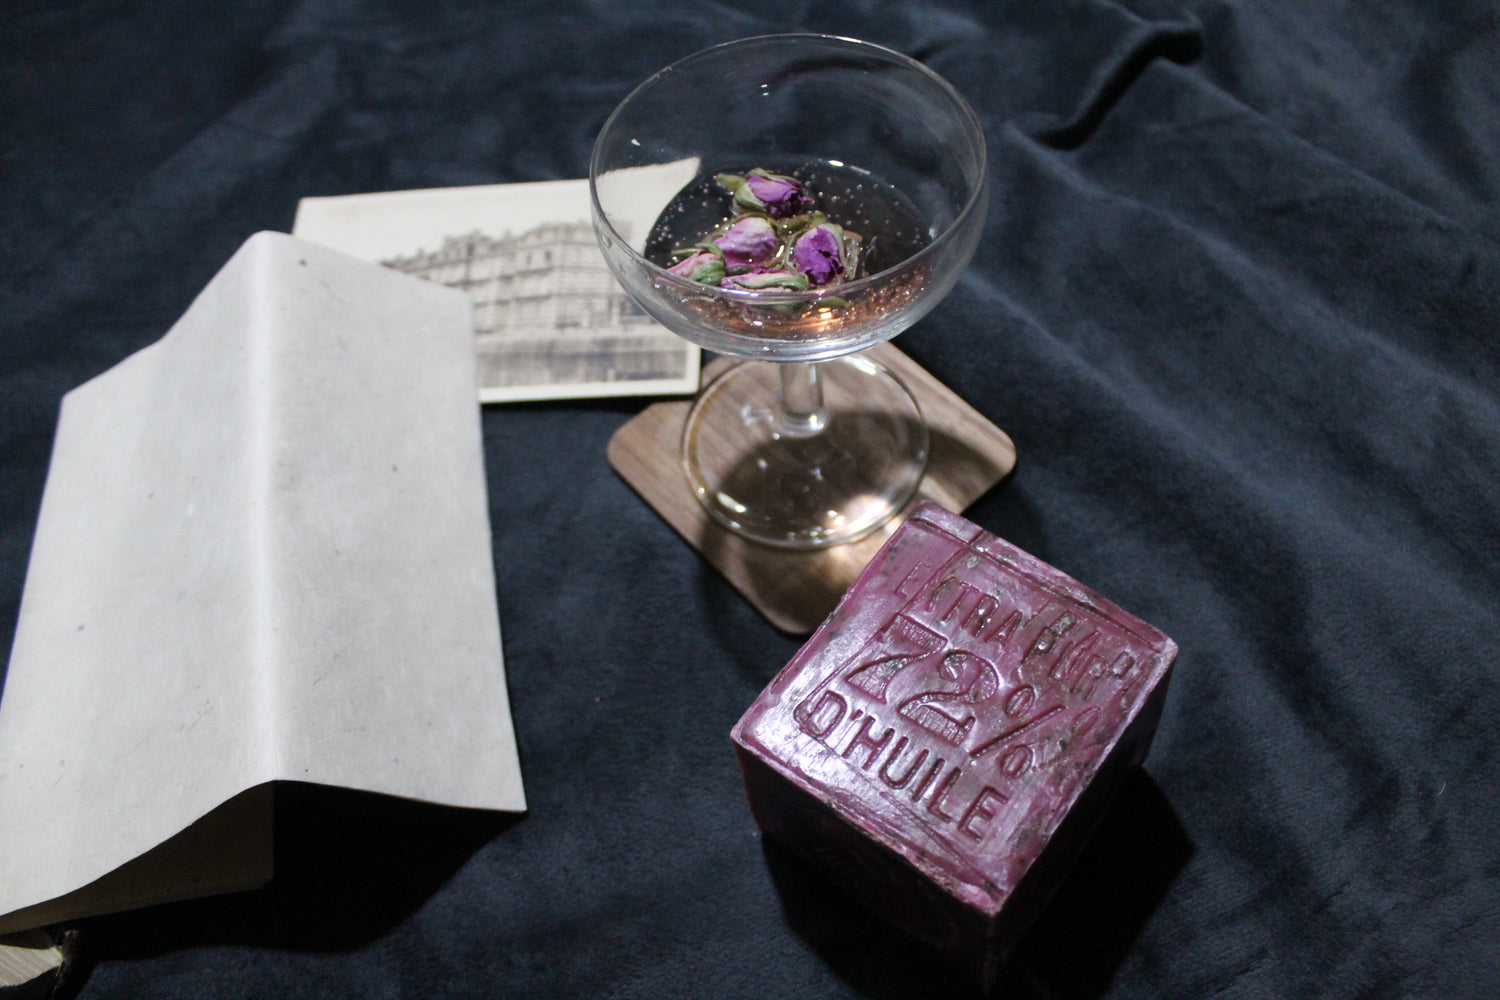 Champagne glass with garnishes, postcard, Marseille soap and letter